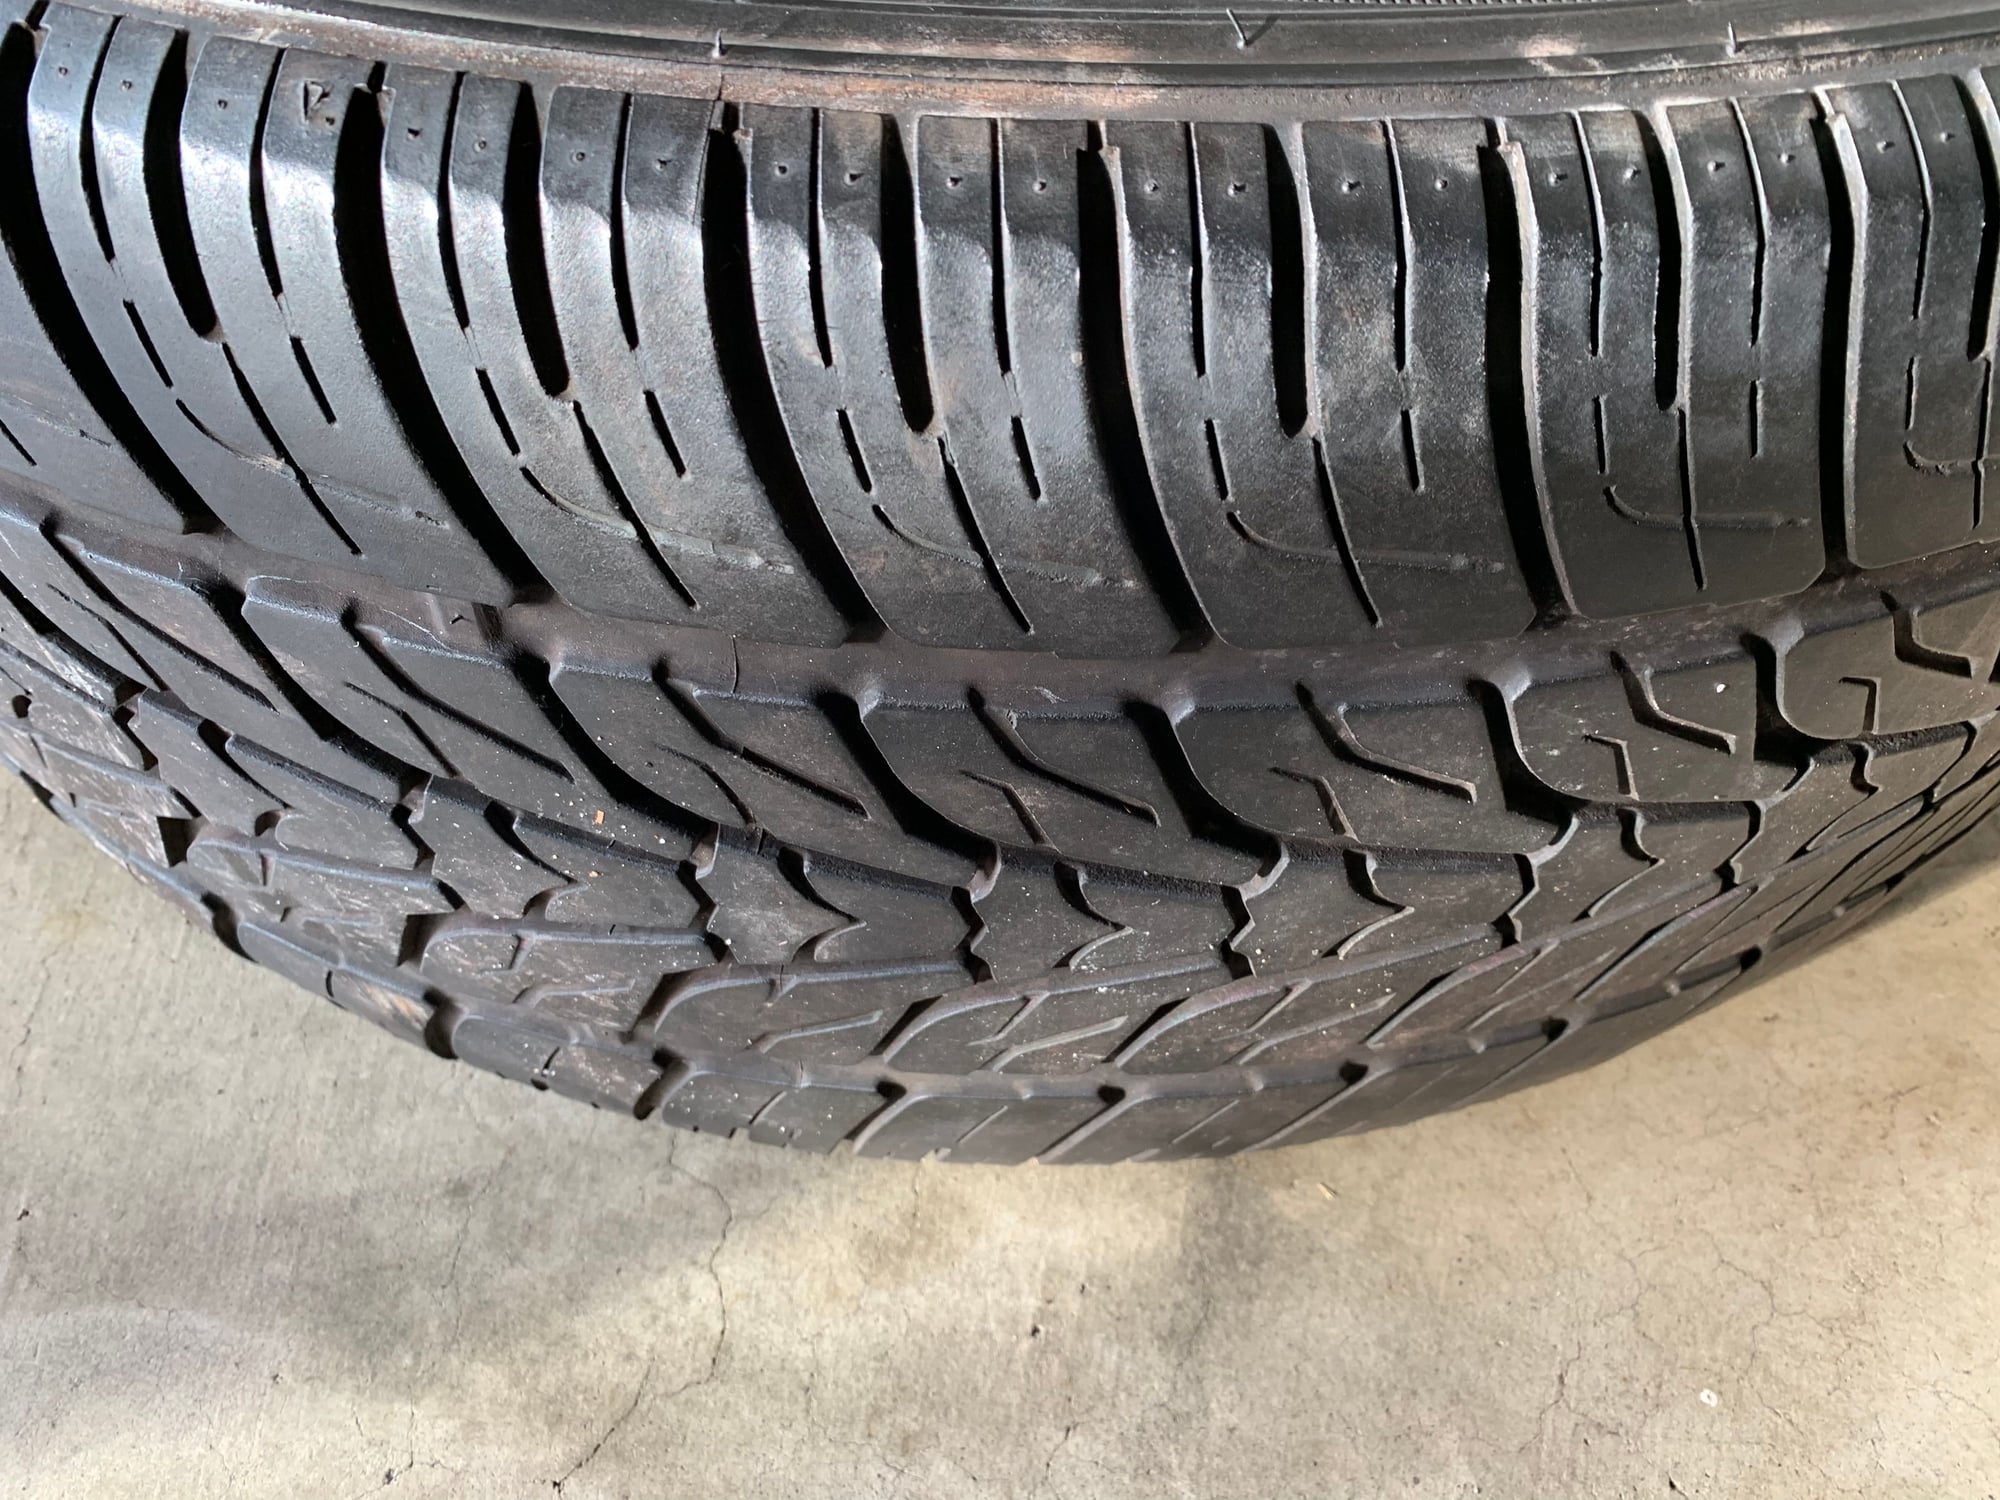 Wheels and Tires/Axles - Mercedes Benz GL450/GL550 22" Wheels/Rims with Tires - Niche Concourse (Matte Black) - Used - 2013 to 2019 Mercedes-Benz GL450 - Leesburg, VA 20176, United States